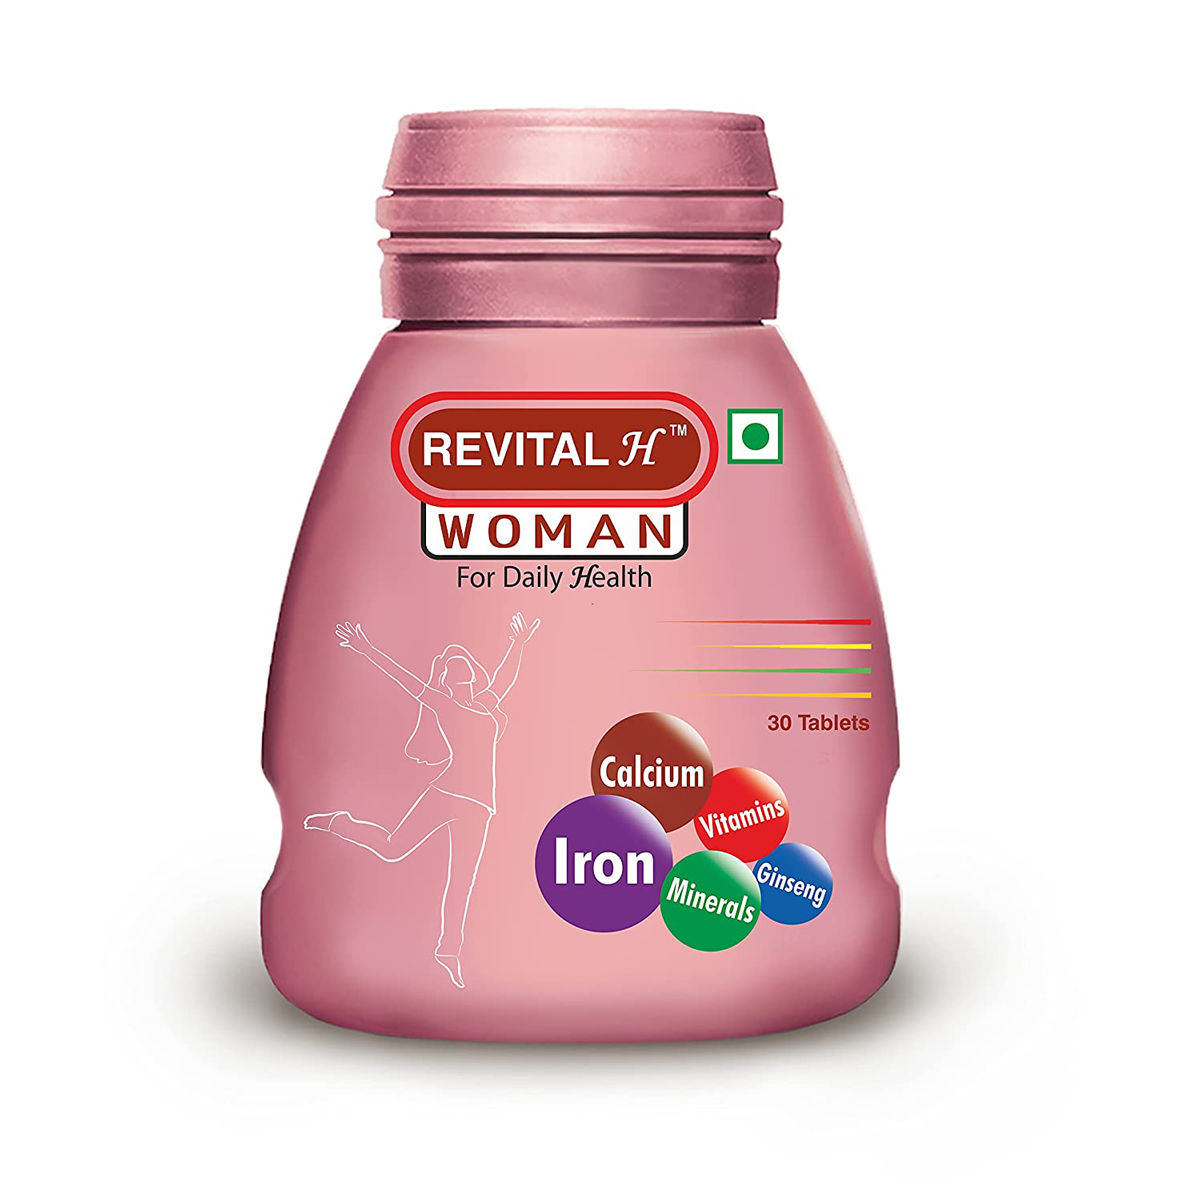 Revital H Woman, 30 Tablets, Pack of 1 